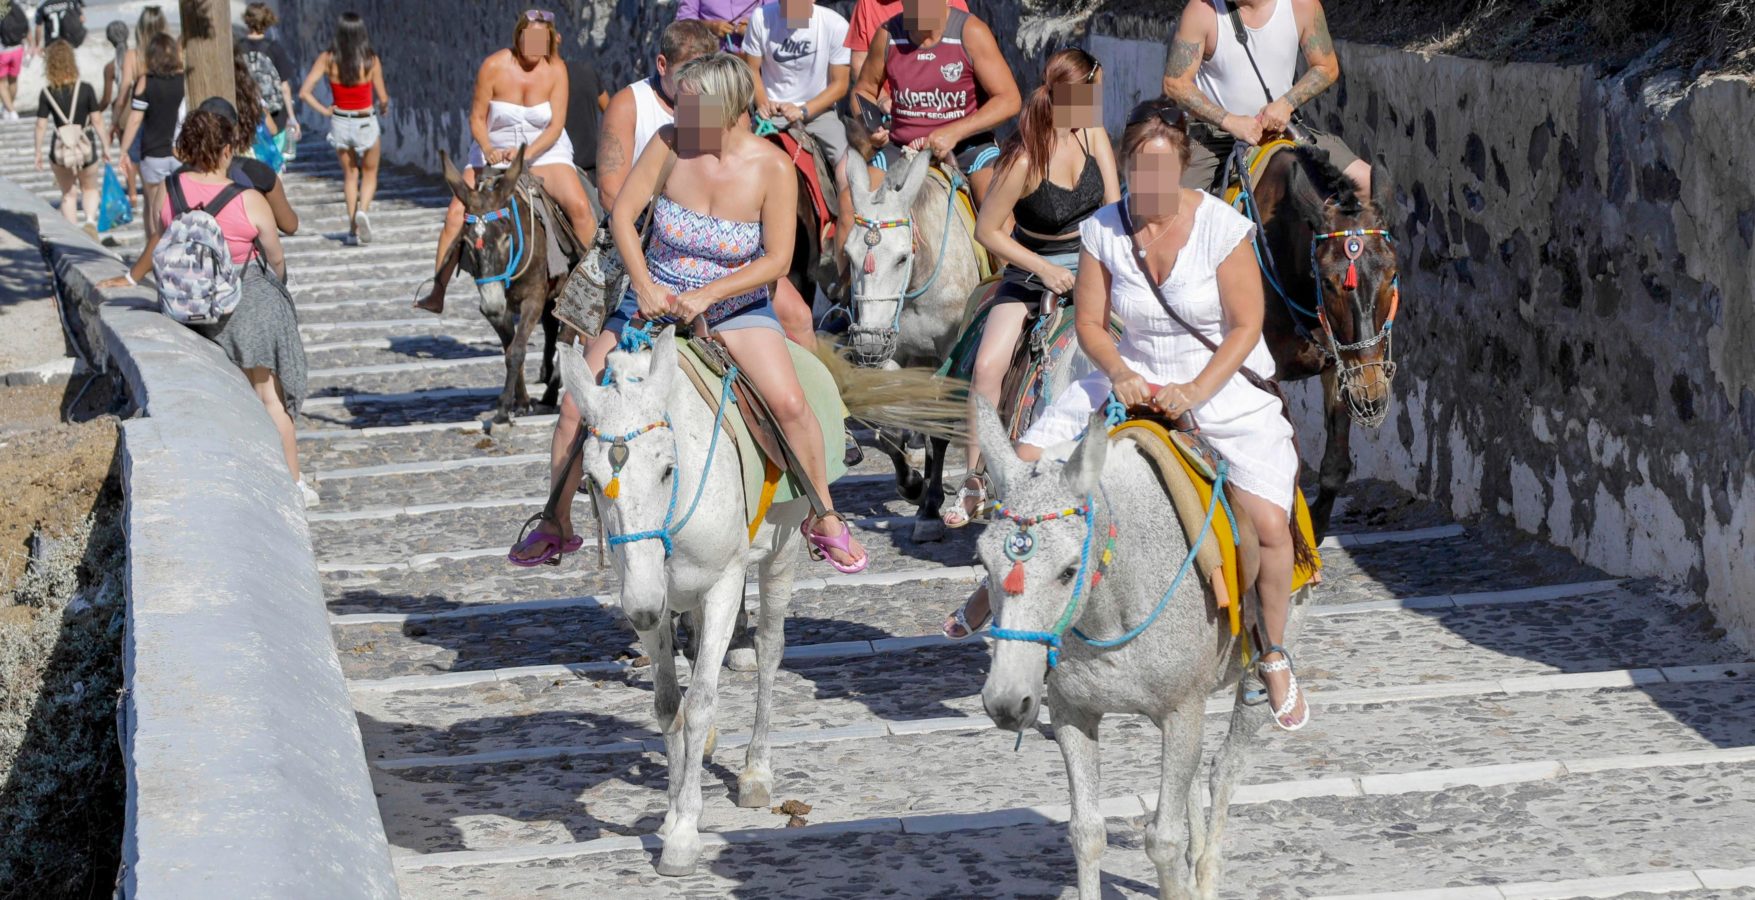 Obese Tourists Banned From Donkey Rides In Greece